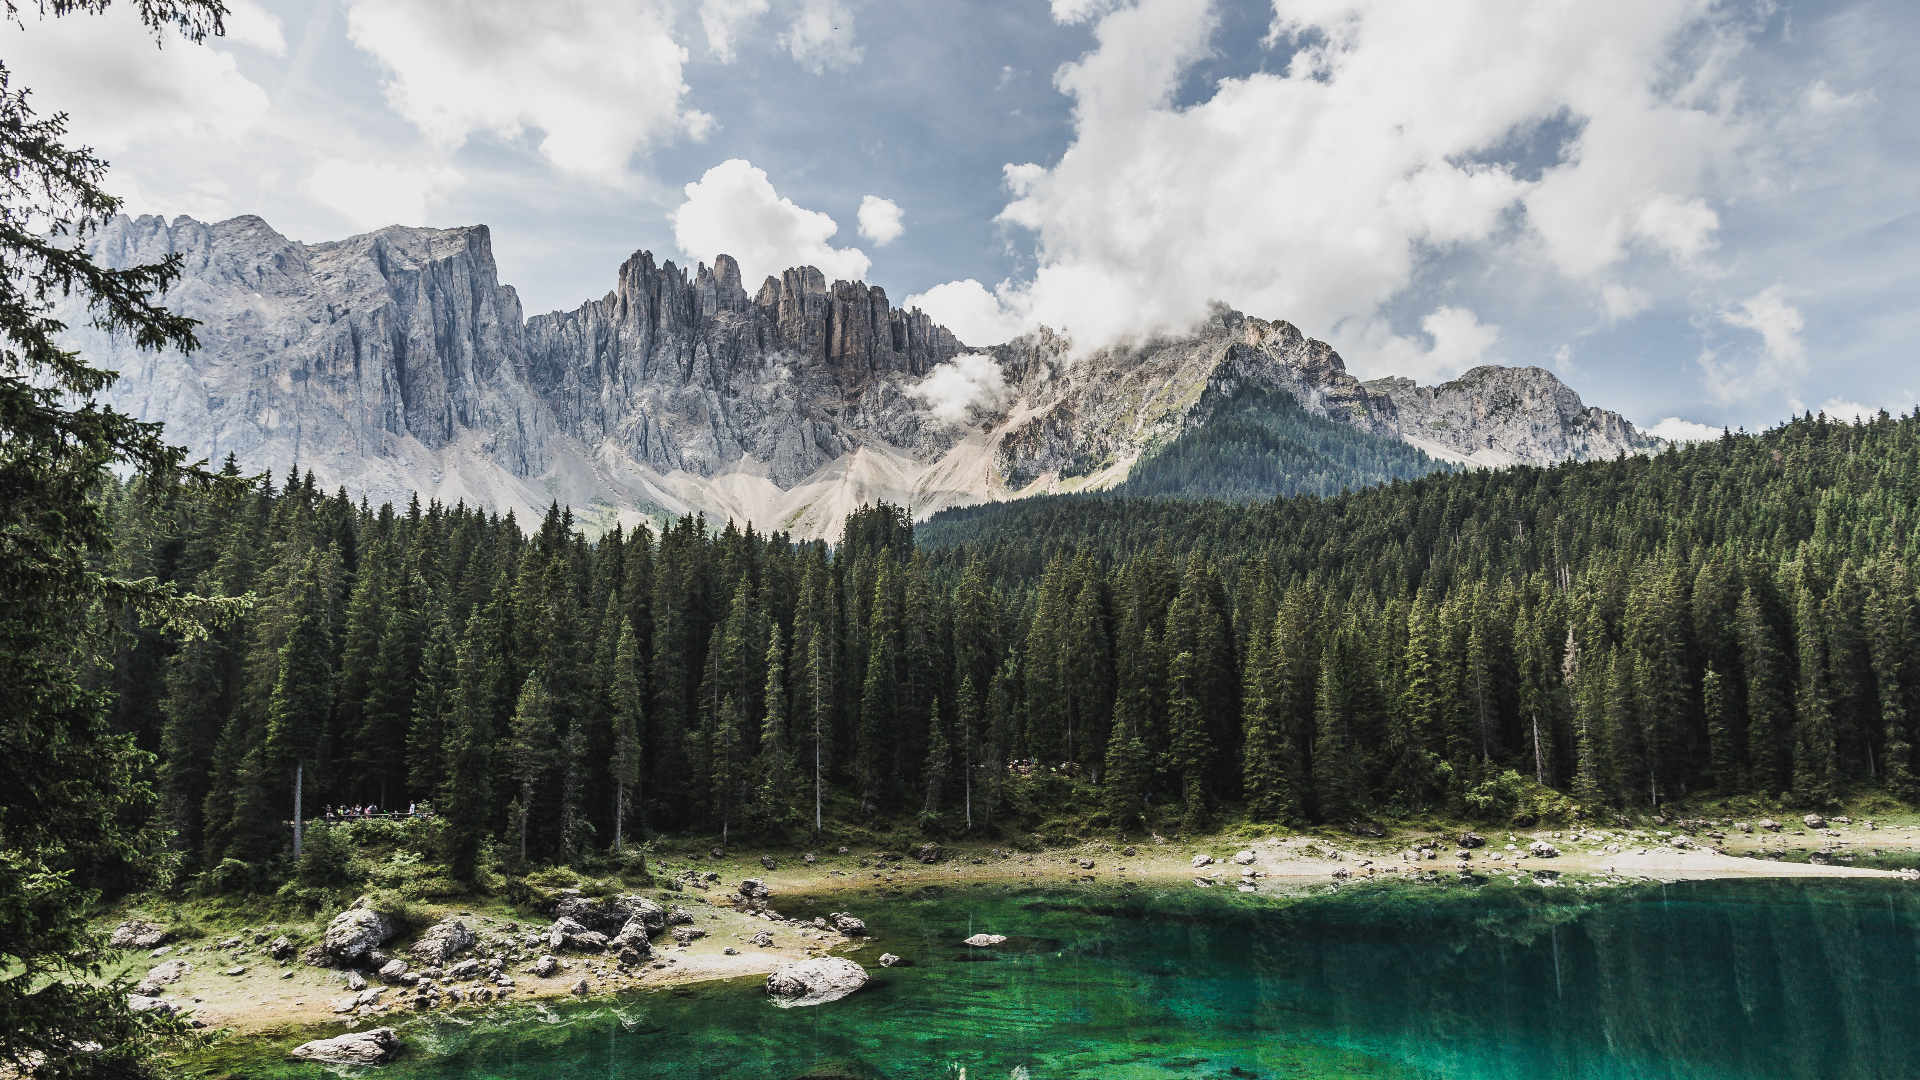 General 1920x1080 nature landscape clouds sky mountains lake rocks trees forest Dolomites Italy